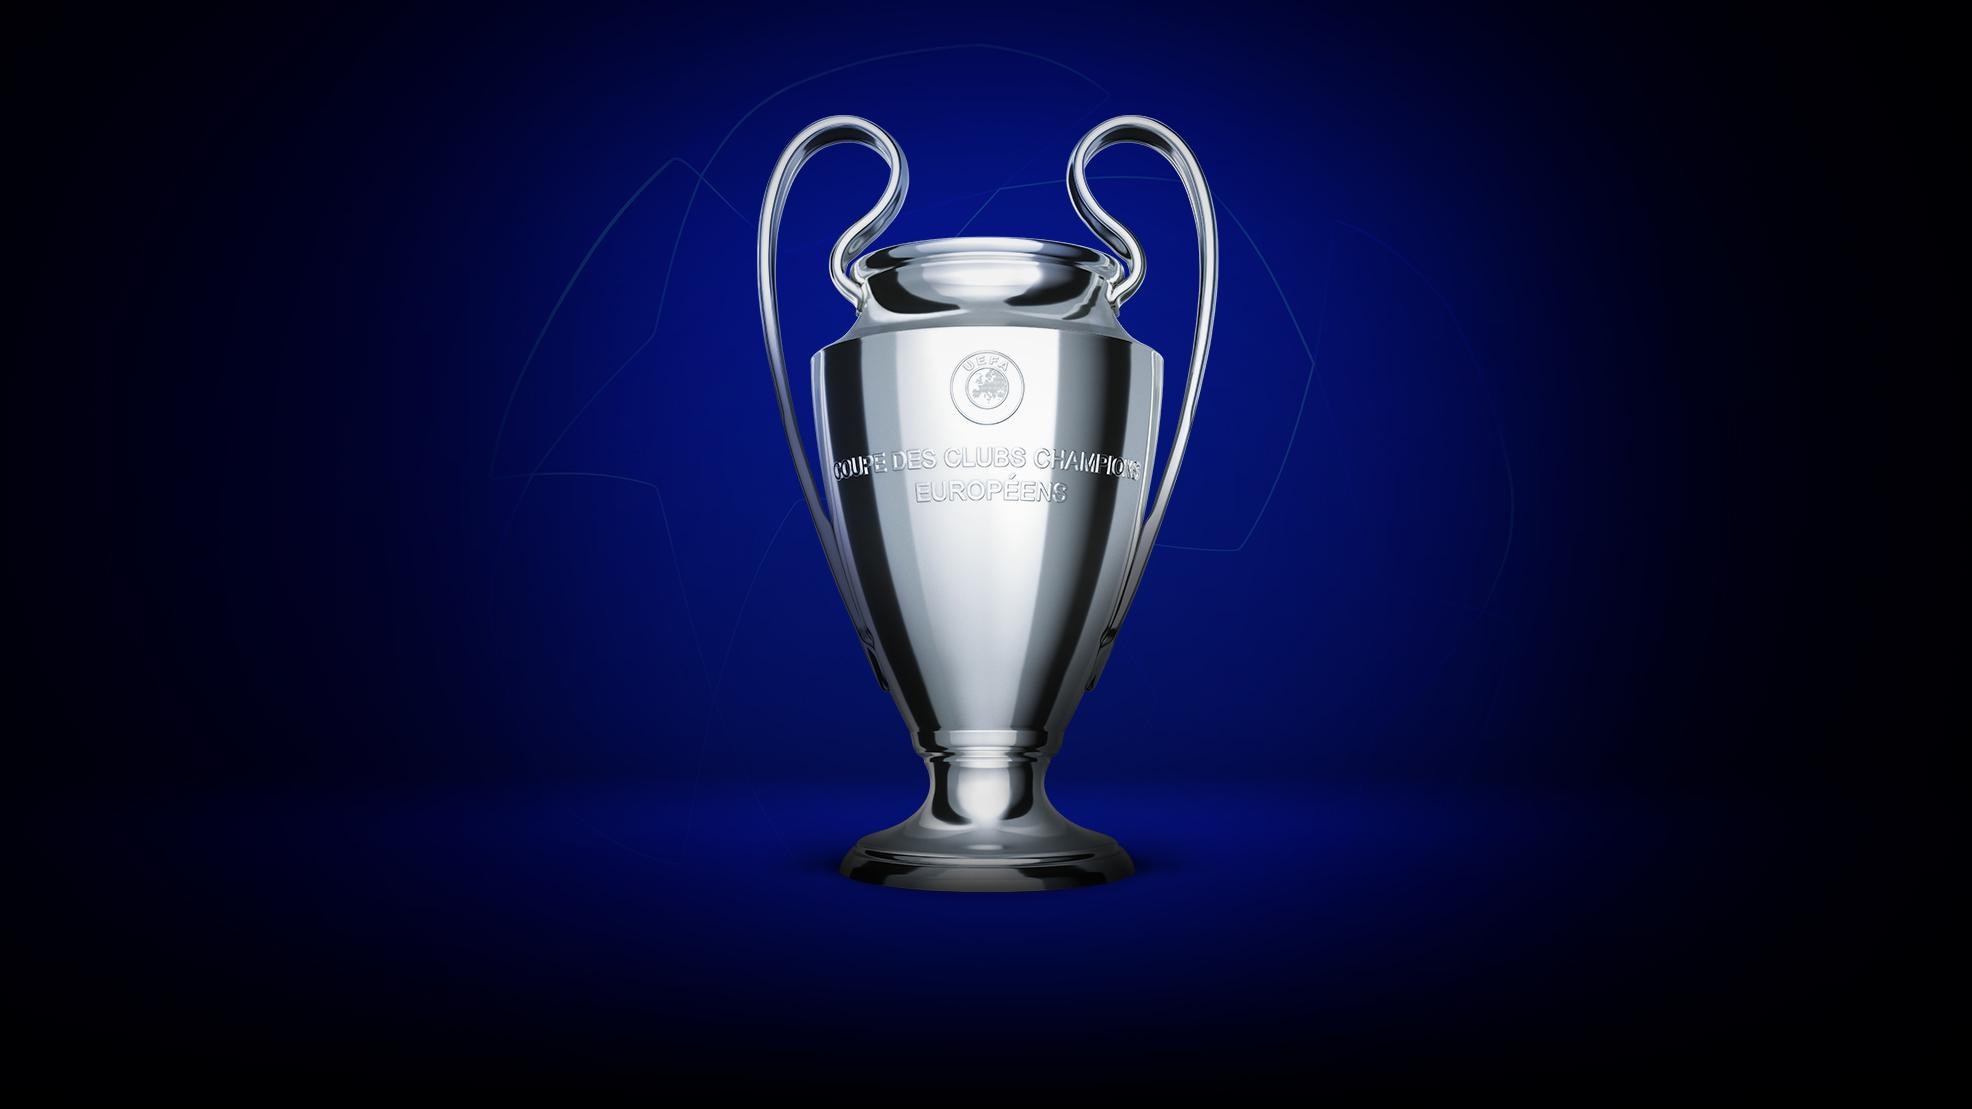 Champions League to resume on 7 August | UEFA Champions League